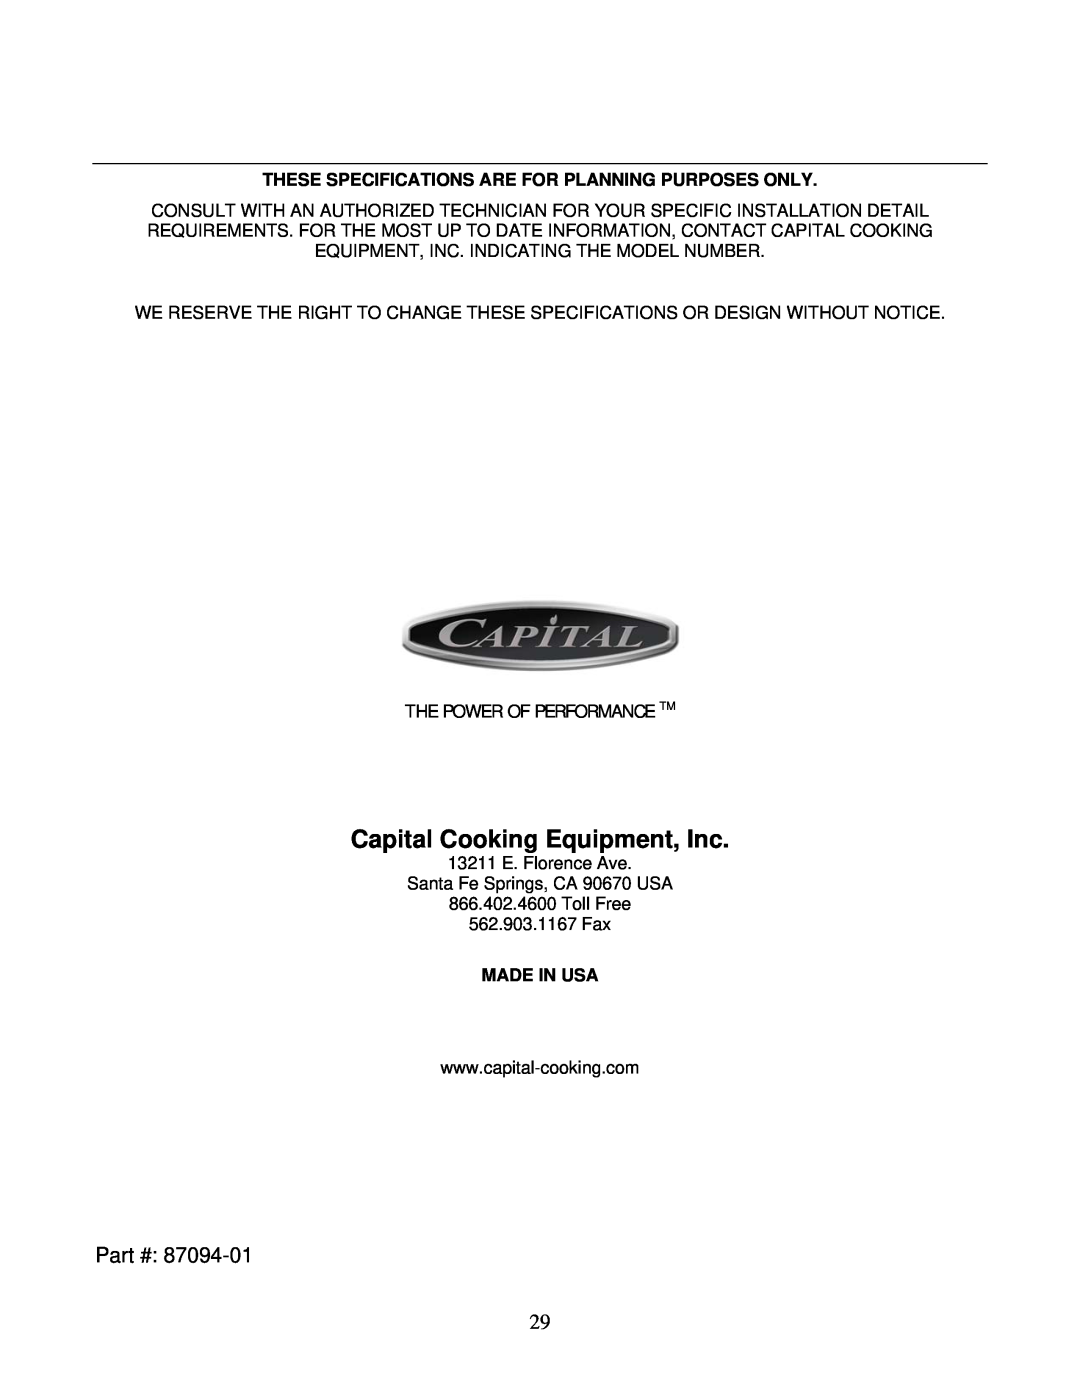 Capital Cooking MWO301ES, MWO302ES manual Capital Cooking Equipment, Inc 